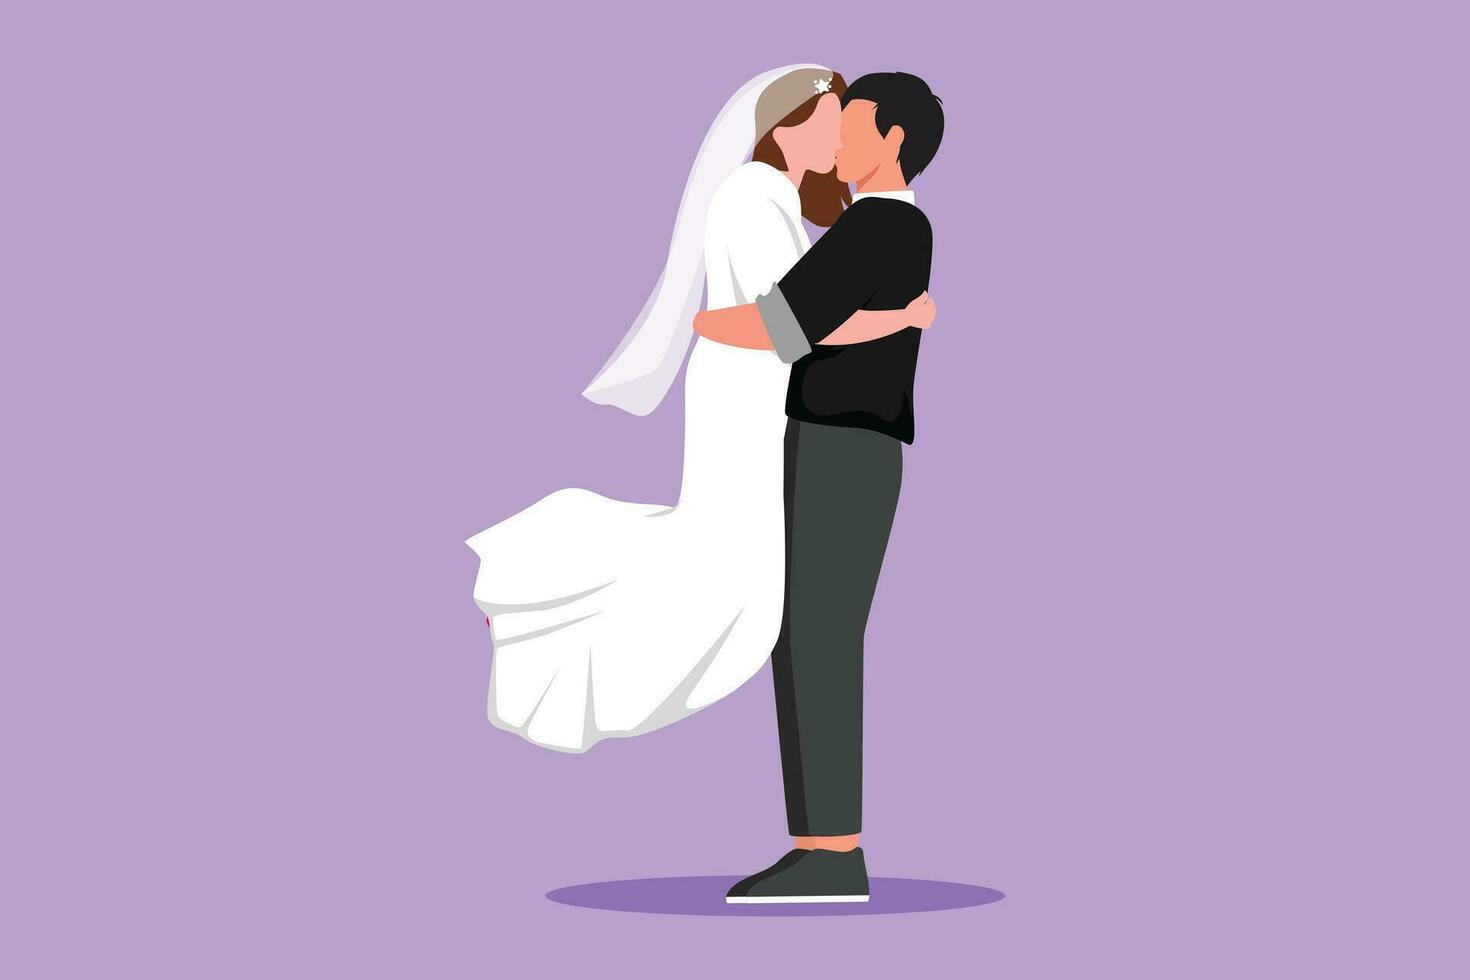 Cartoon flat style drawing of romantic married couple in love kissing and hugging with wedding dress. Man carrying a jumping beautiful woman in wedding celebration. Graphic design vector illustration